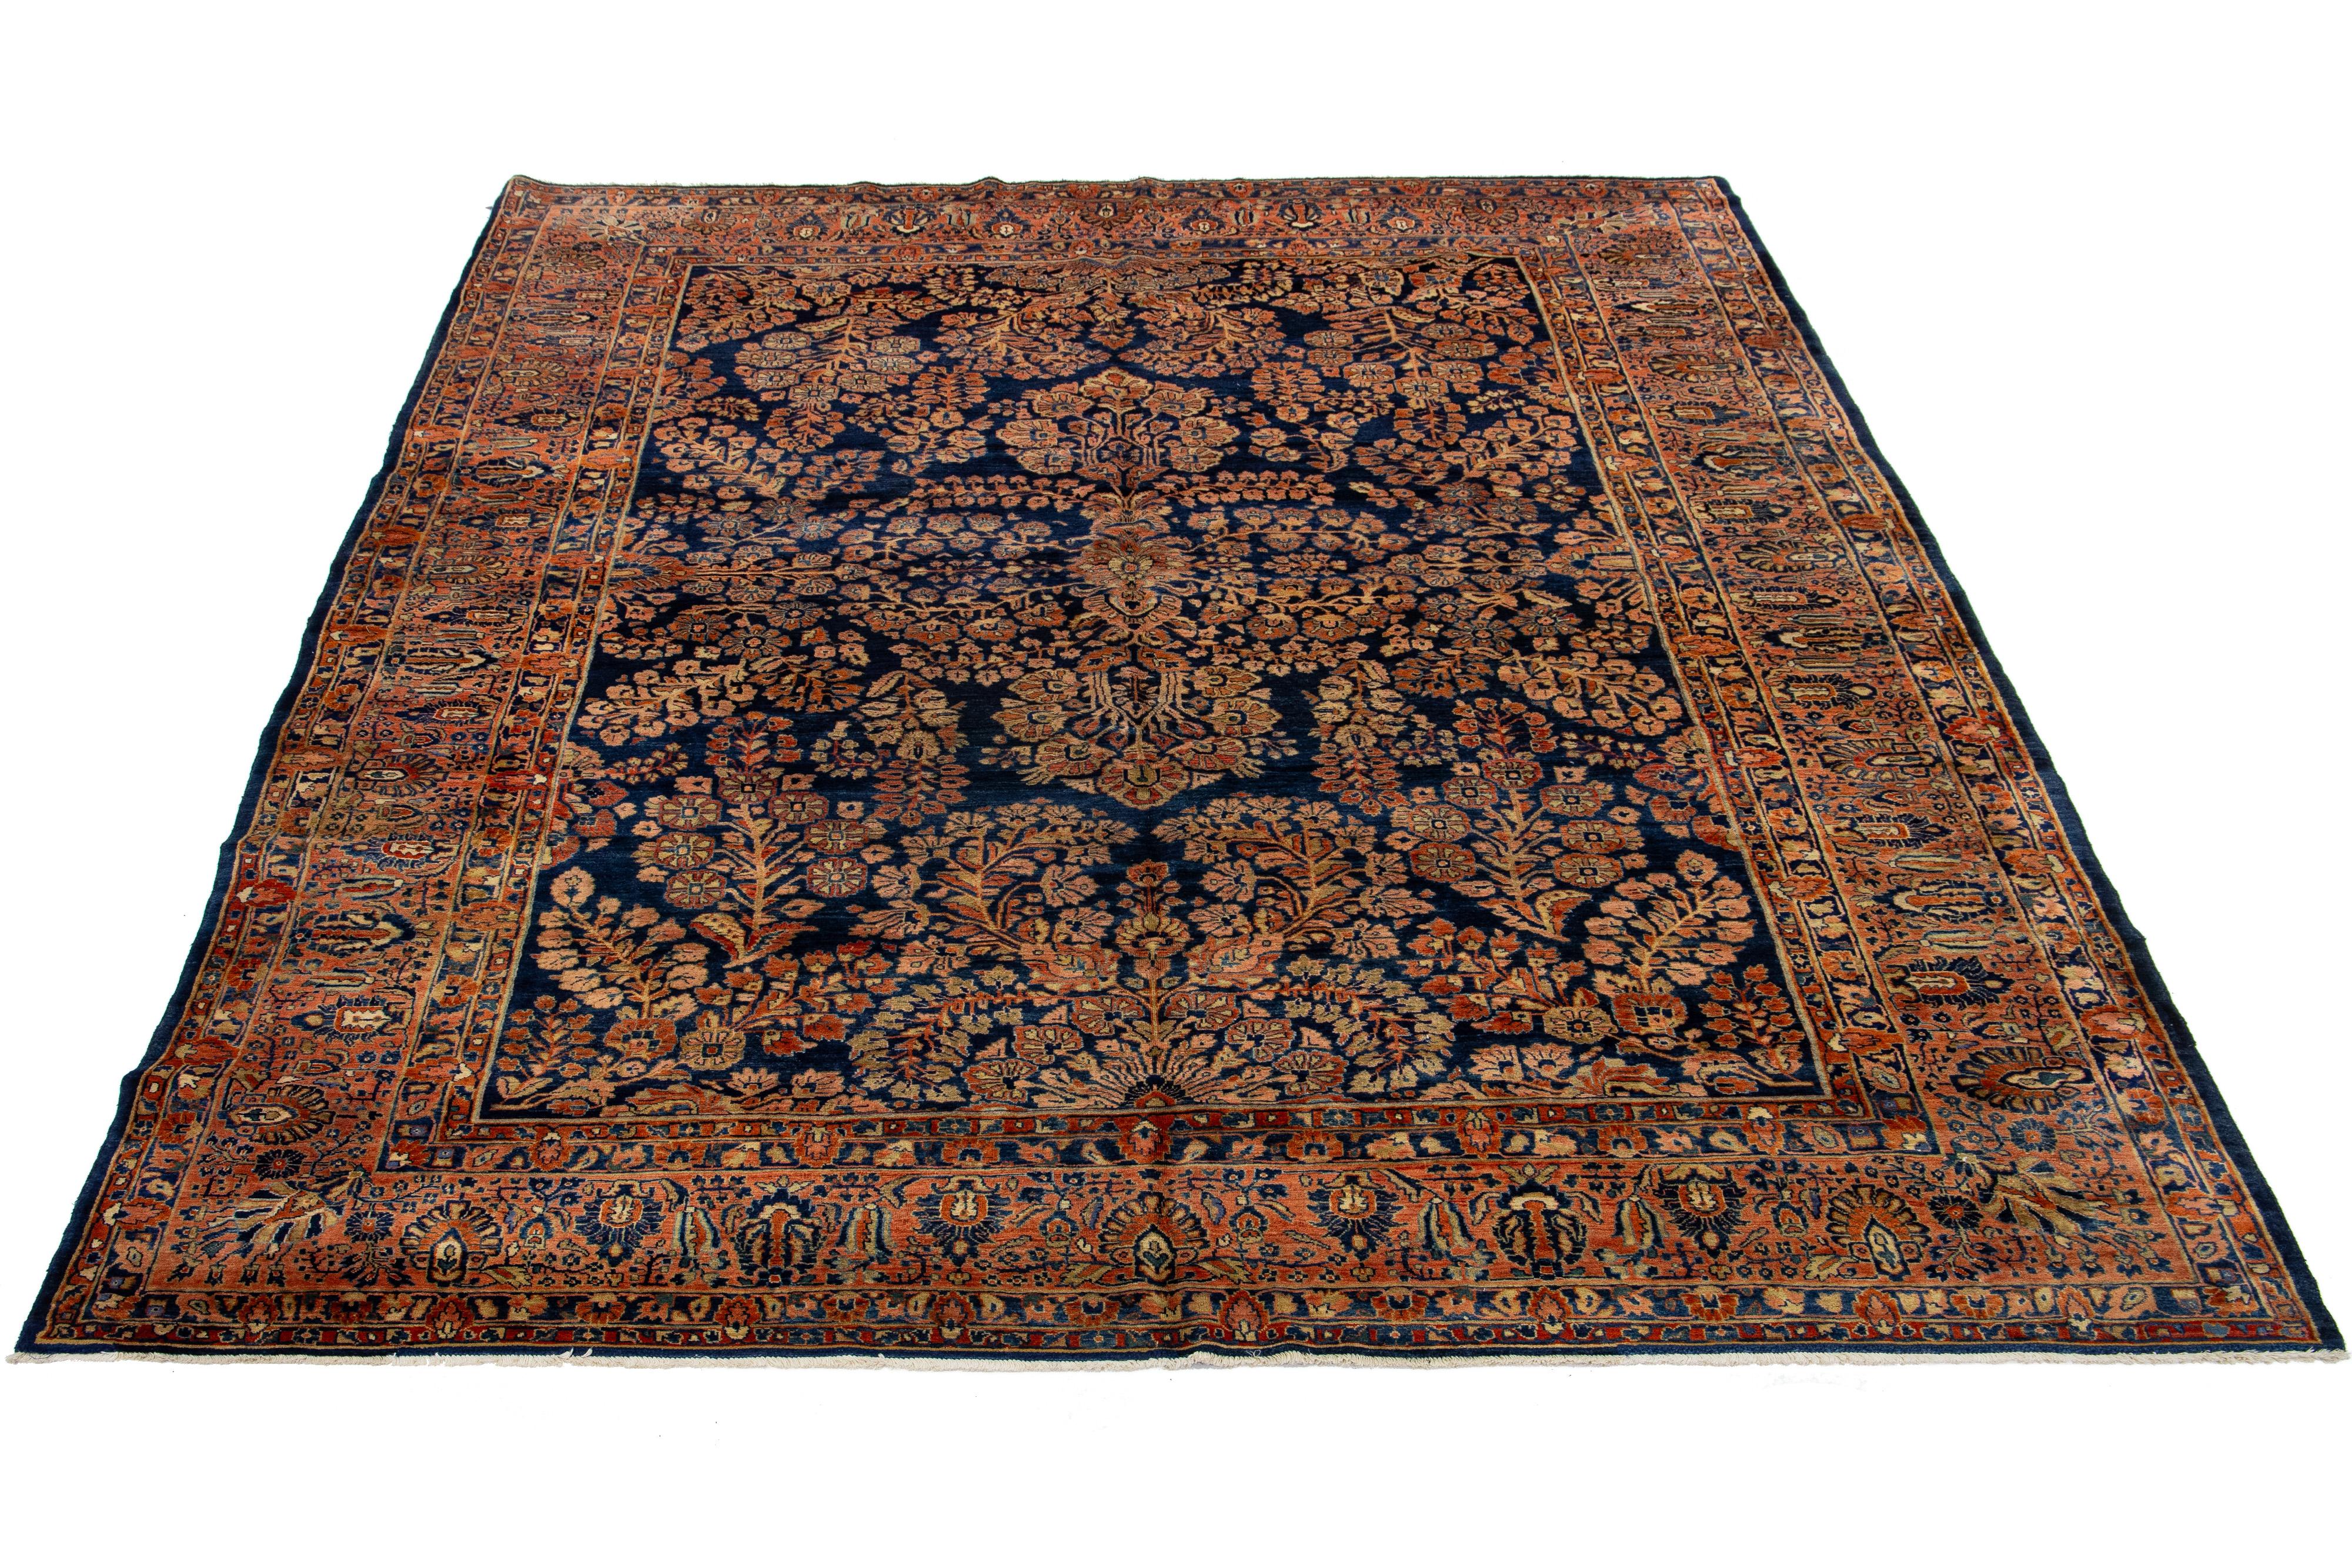  This is a beautiful hand-knotted wool Sarouk Farahan rug with a navy blue field. The rug features a rust colored frame with peach and tan accents in a classic floral design. 

This rug measures 8'9